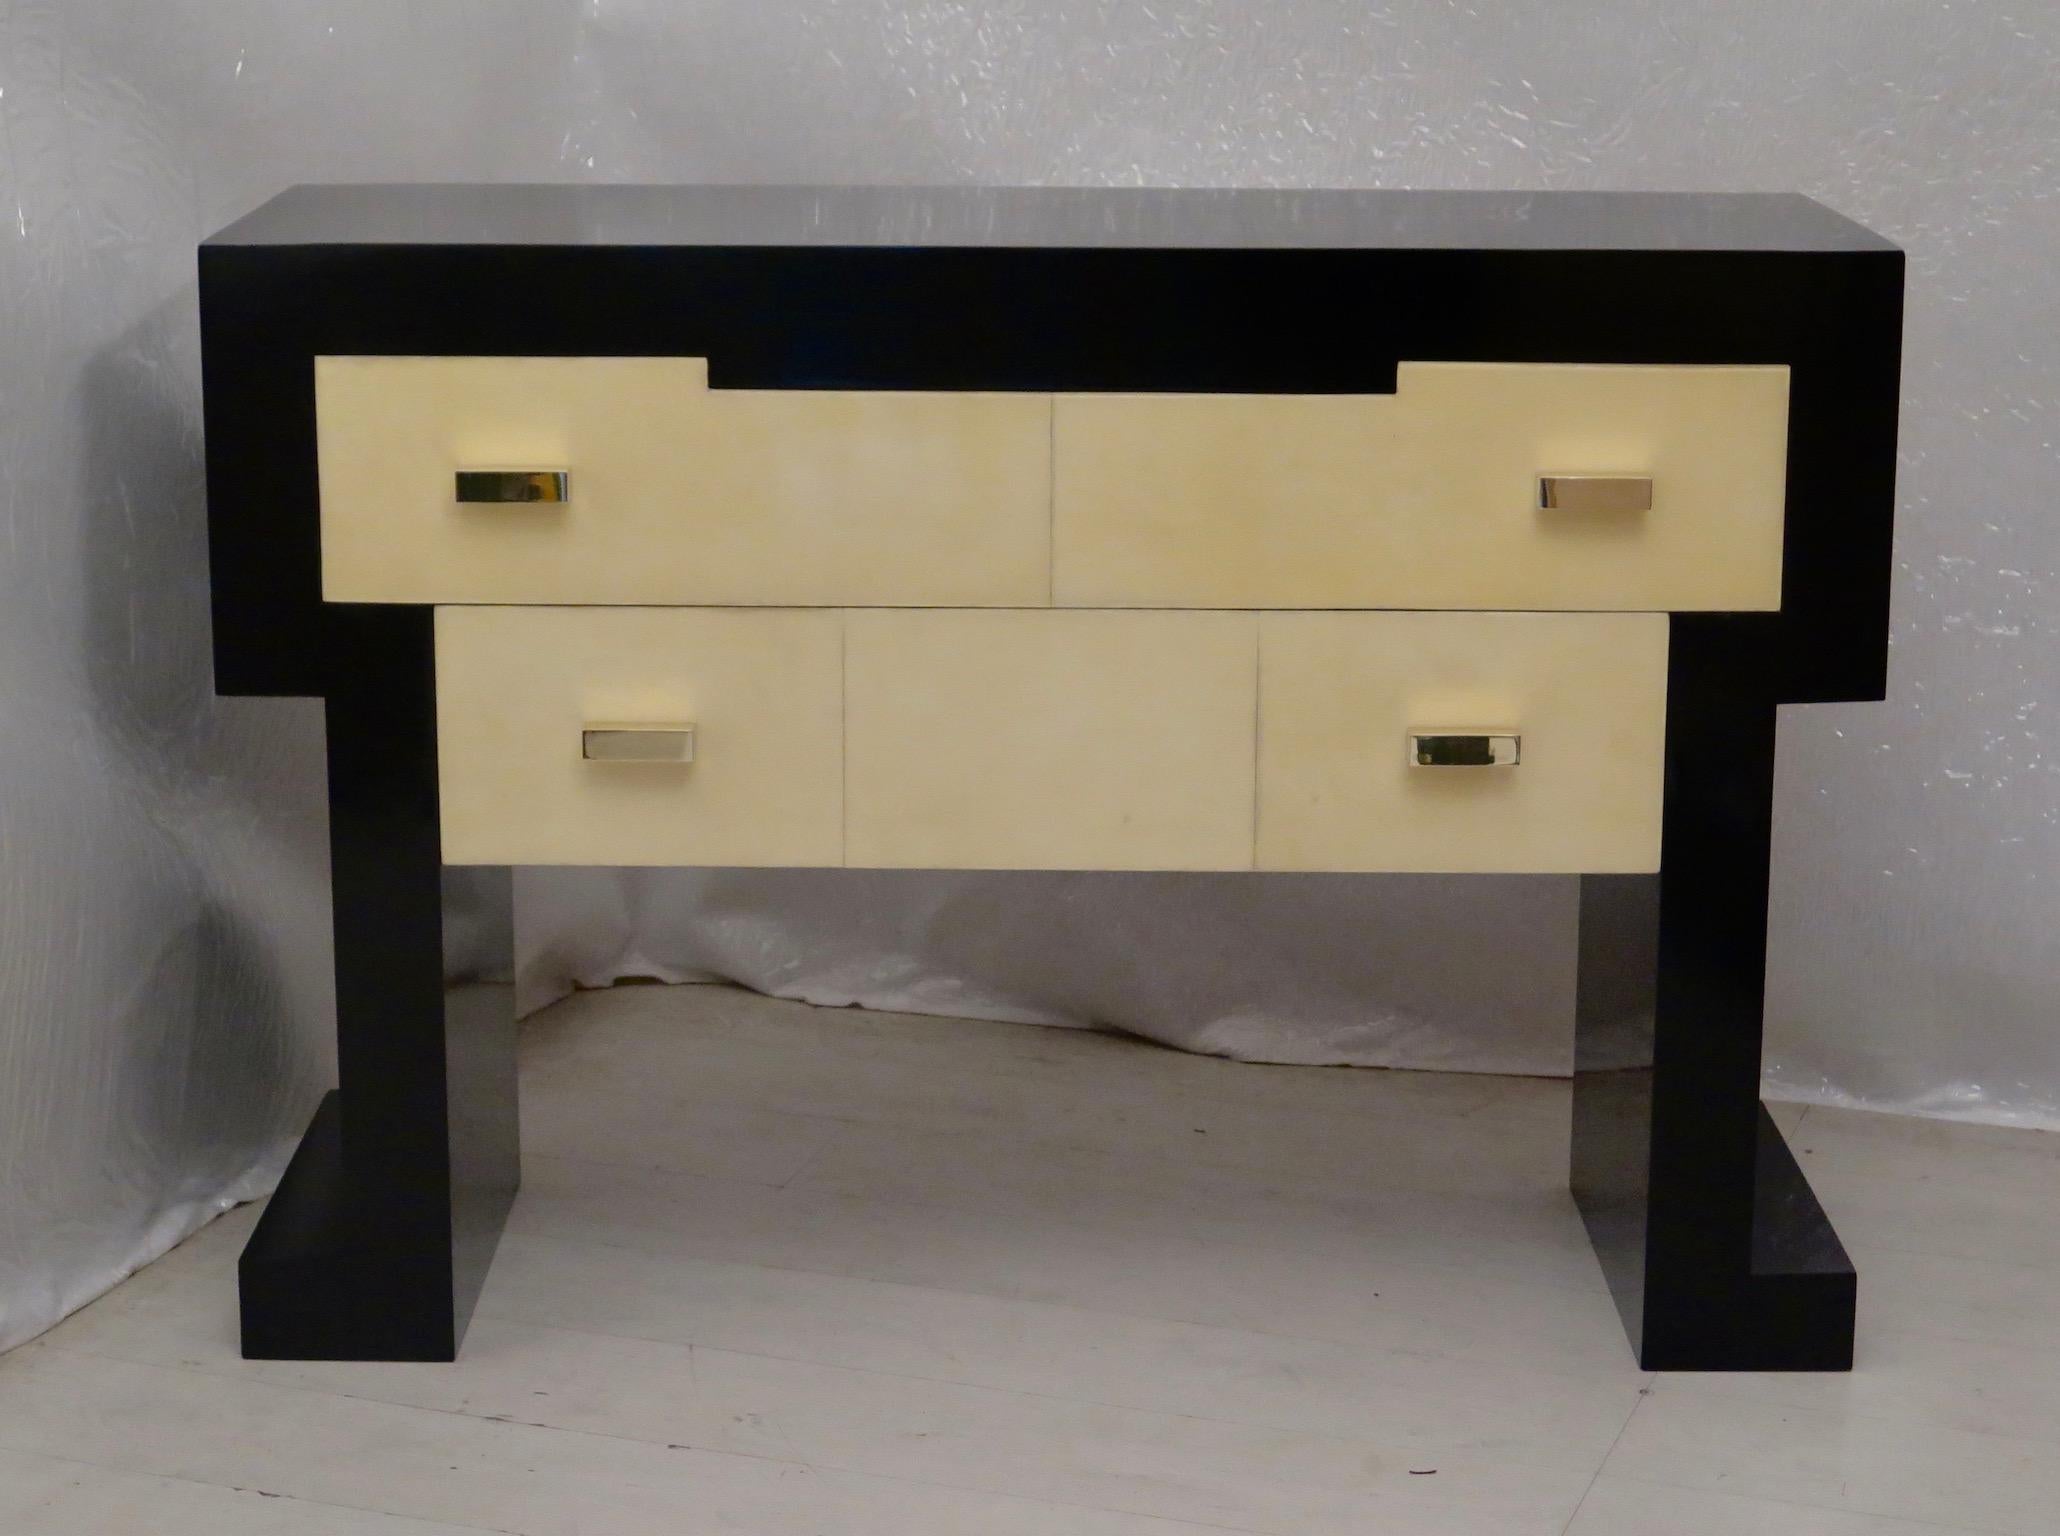 Italian midcentury chest of drawers. Body completely lacquered in black shellac. On the front two drawers, one smaller and one larger, covered in parchment leather. The parchment leather was then polished with transparent resin. Two brass handles